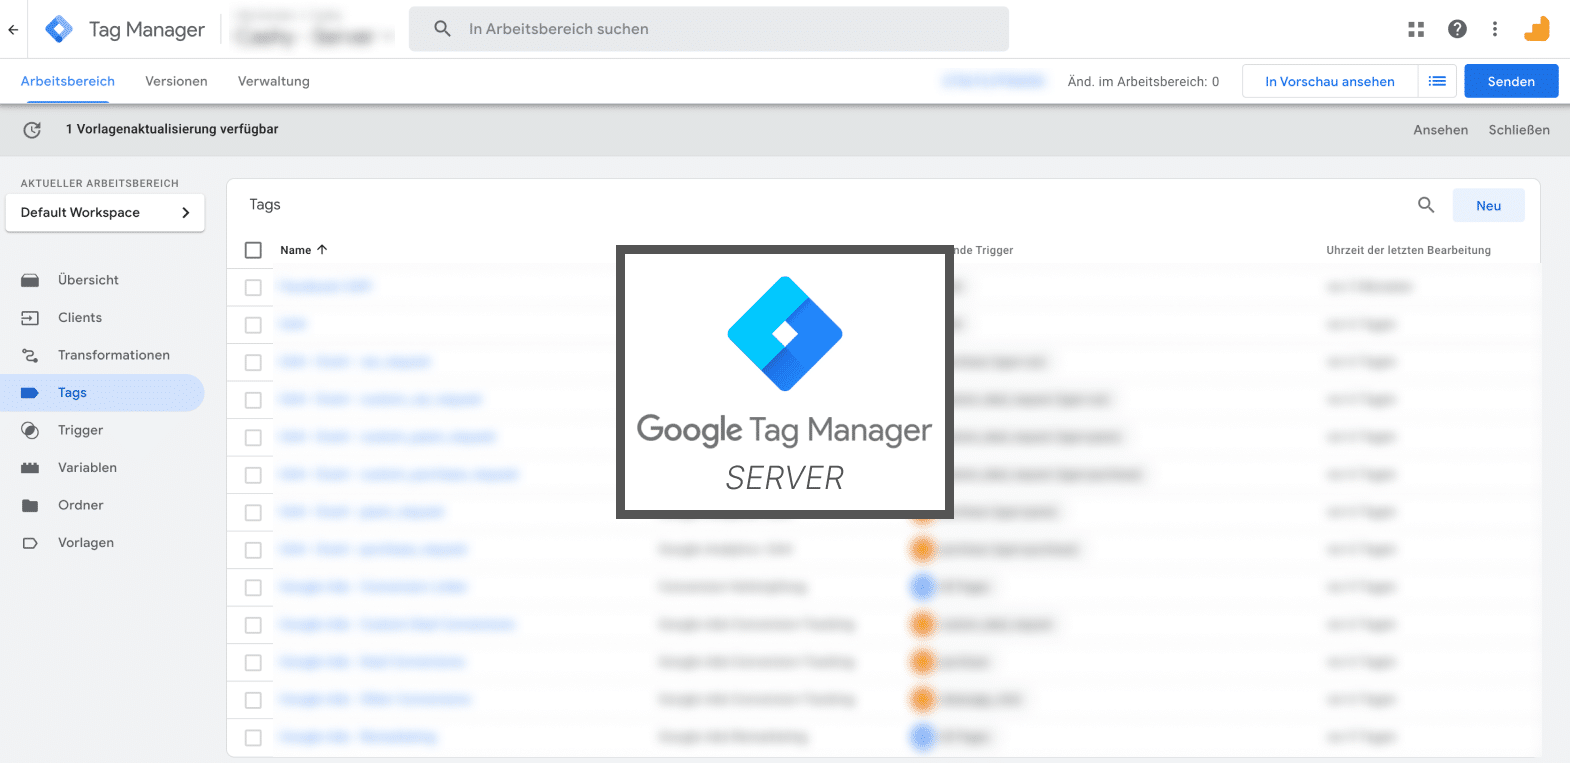 Google Tag Manager Server Interface